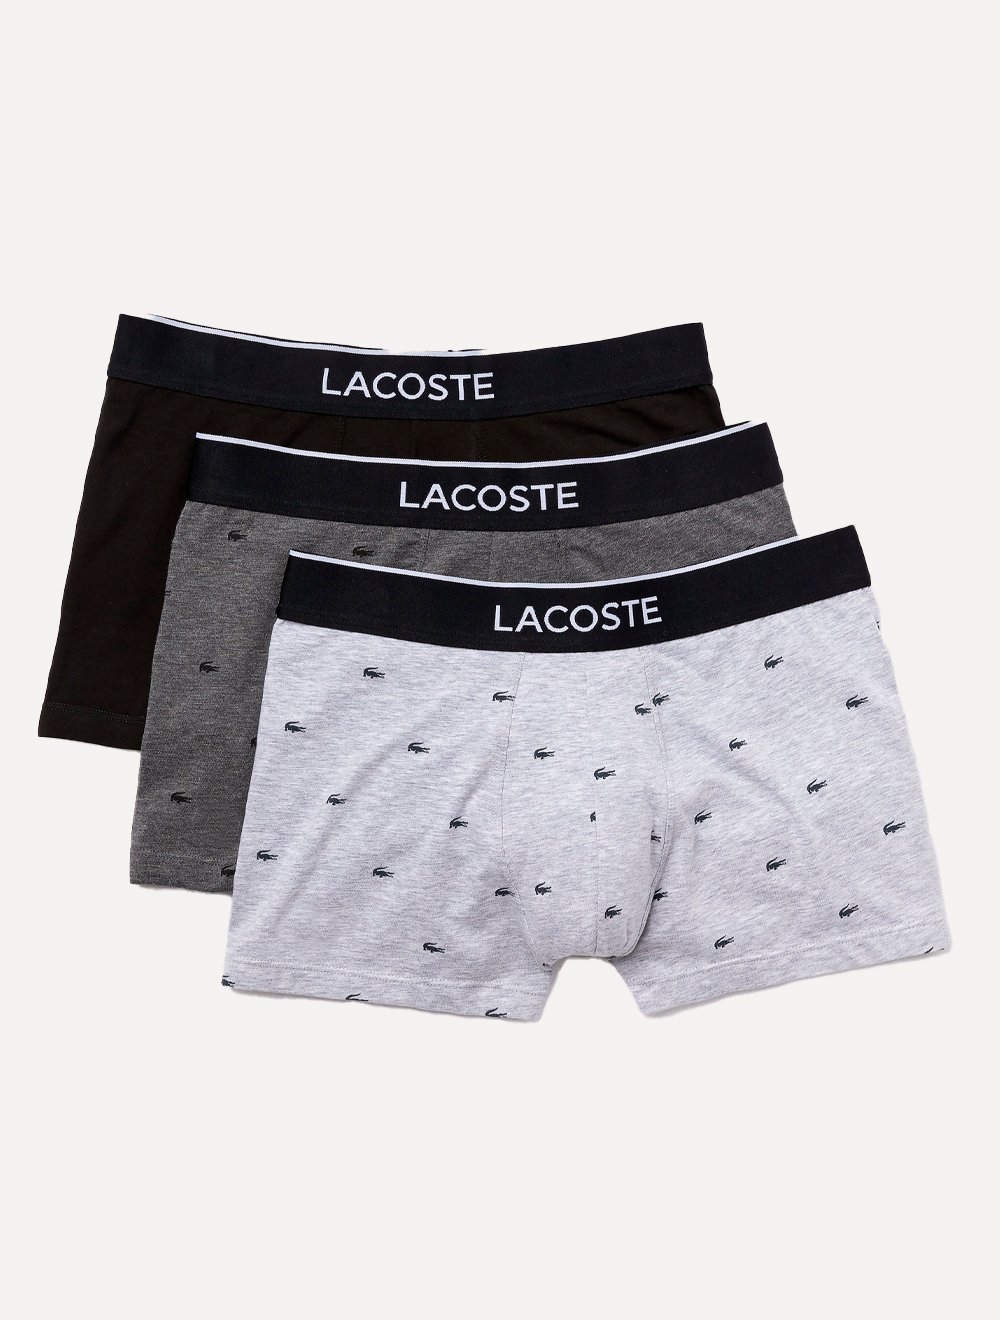 Lacoste - Outlet Masculino